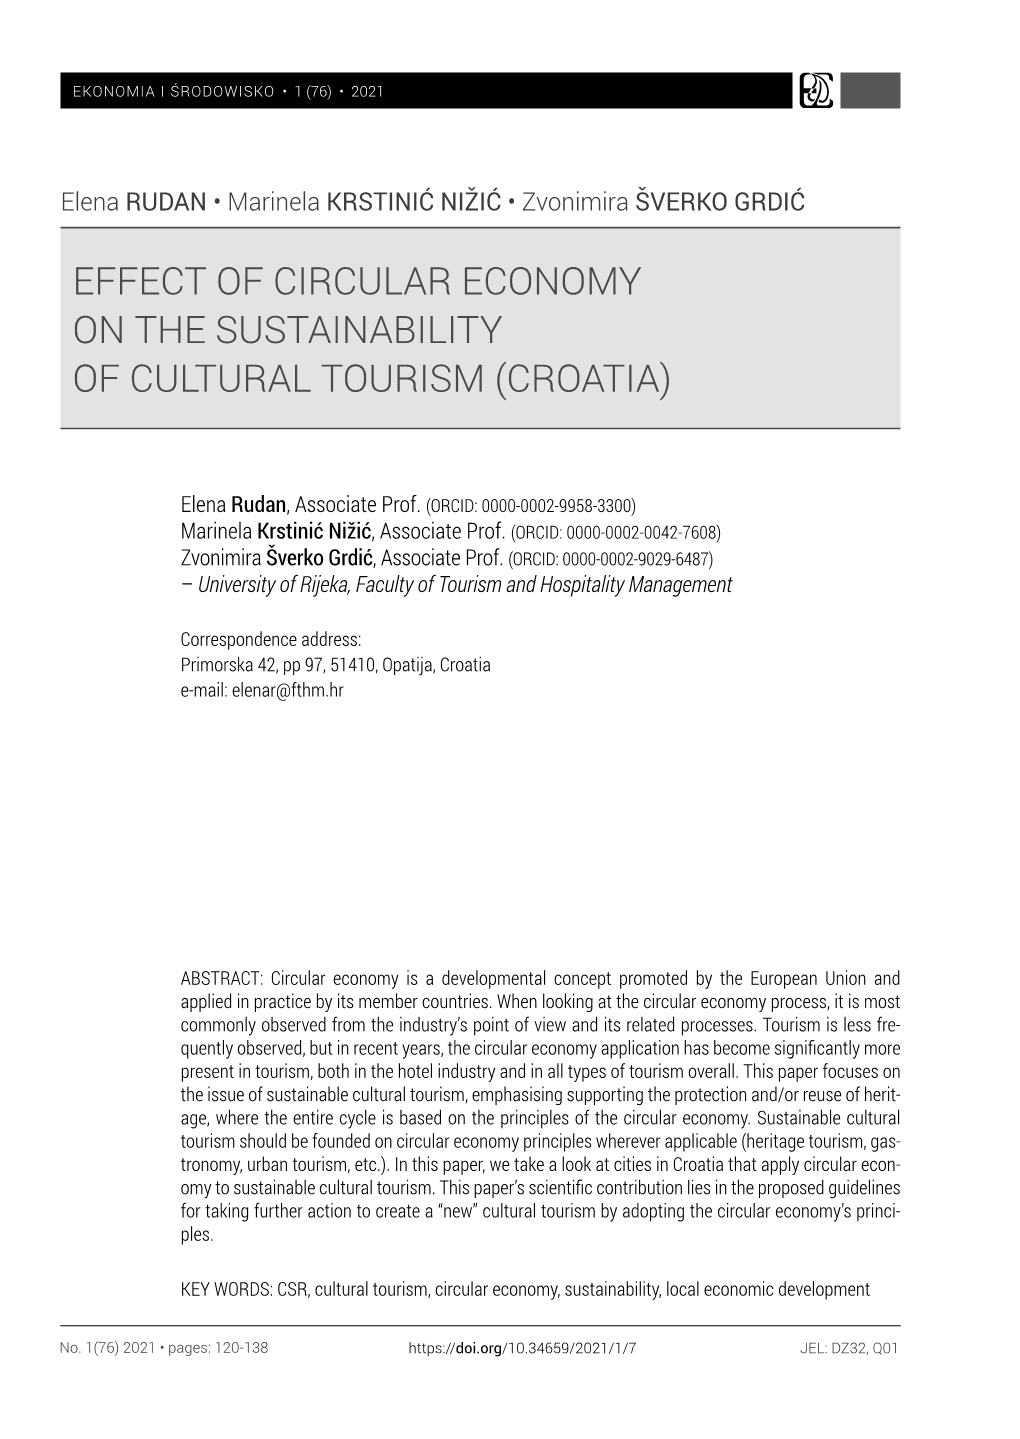 Effect of Circular Economy on the Sustainability of Cultural Tourism (Croatia)